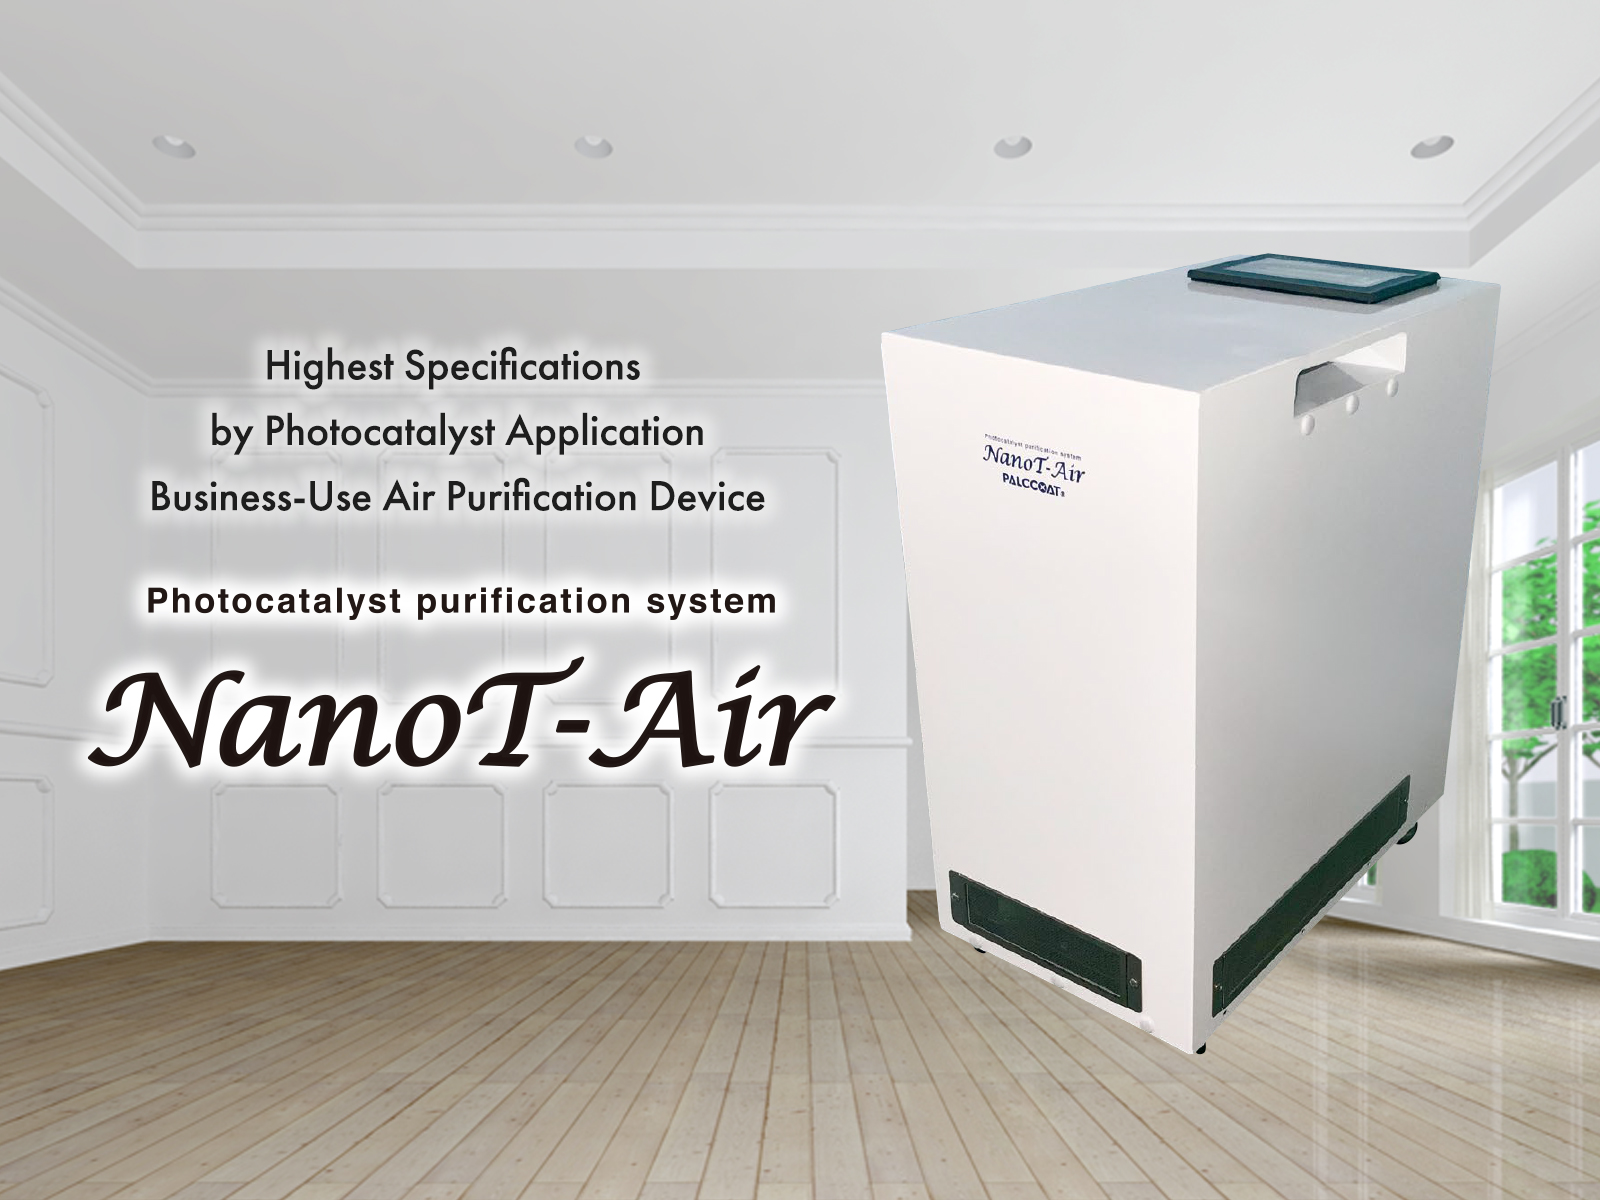 NanoT-Air main image Highest Specifications 
by Photocatalyst Application Business-Use Air Purification Device